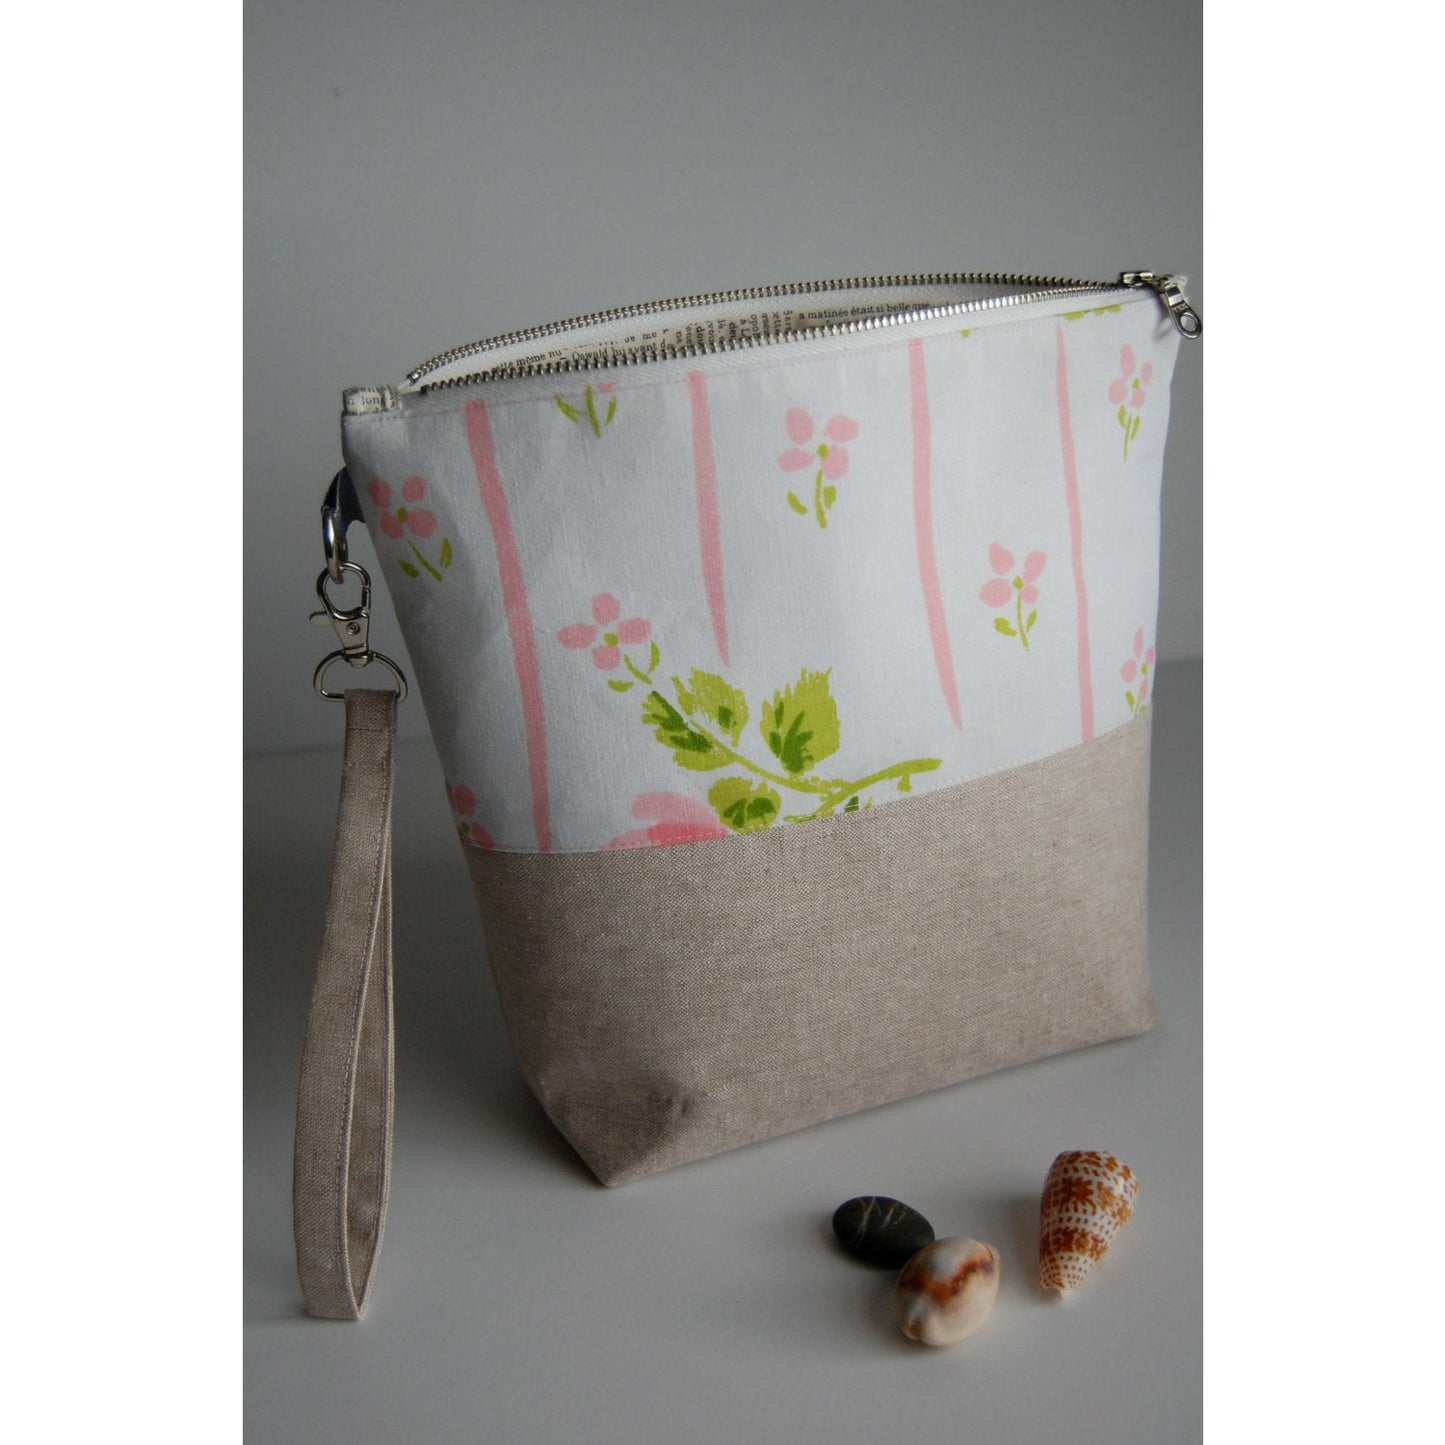 Project Bag, Knitting Bag, Medium Size Vintage and Linen, Spring Inspired Bag with YKK Metal Zipper- THE LORETTA